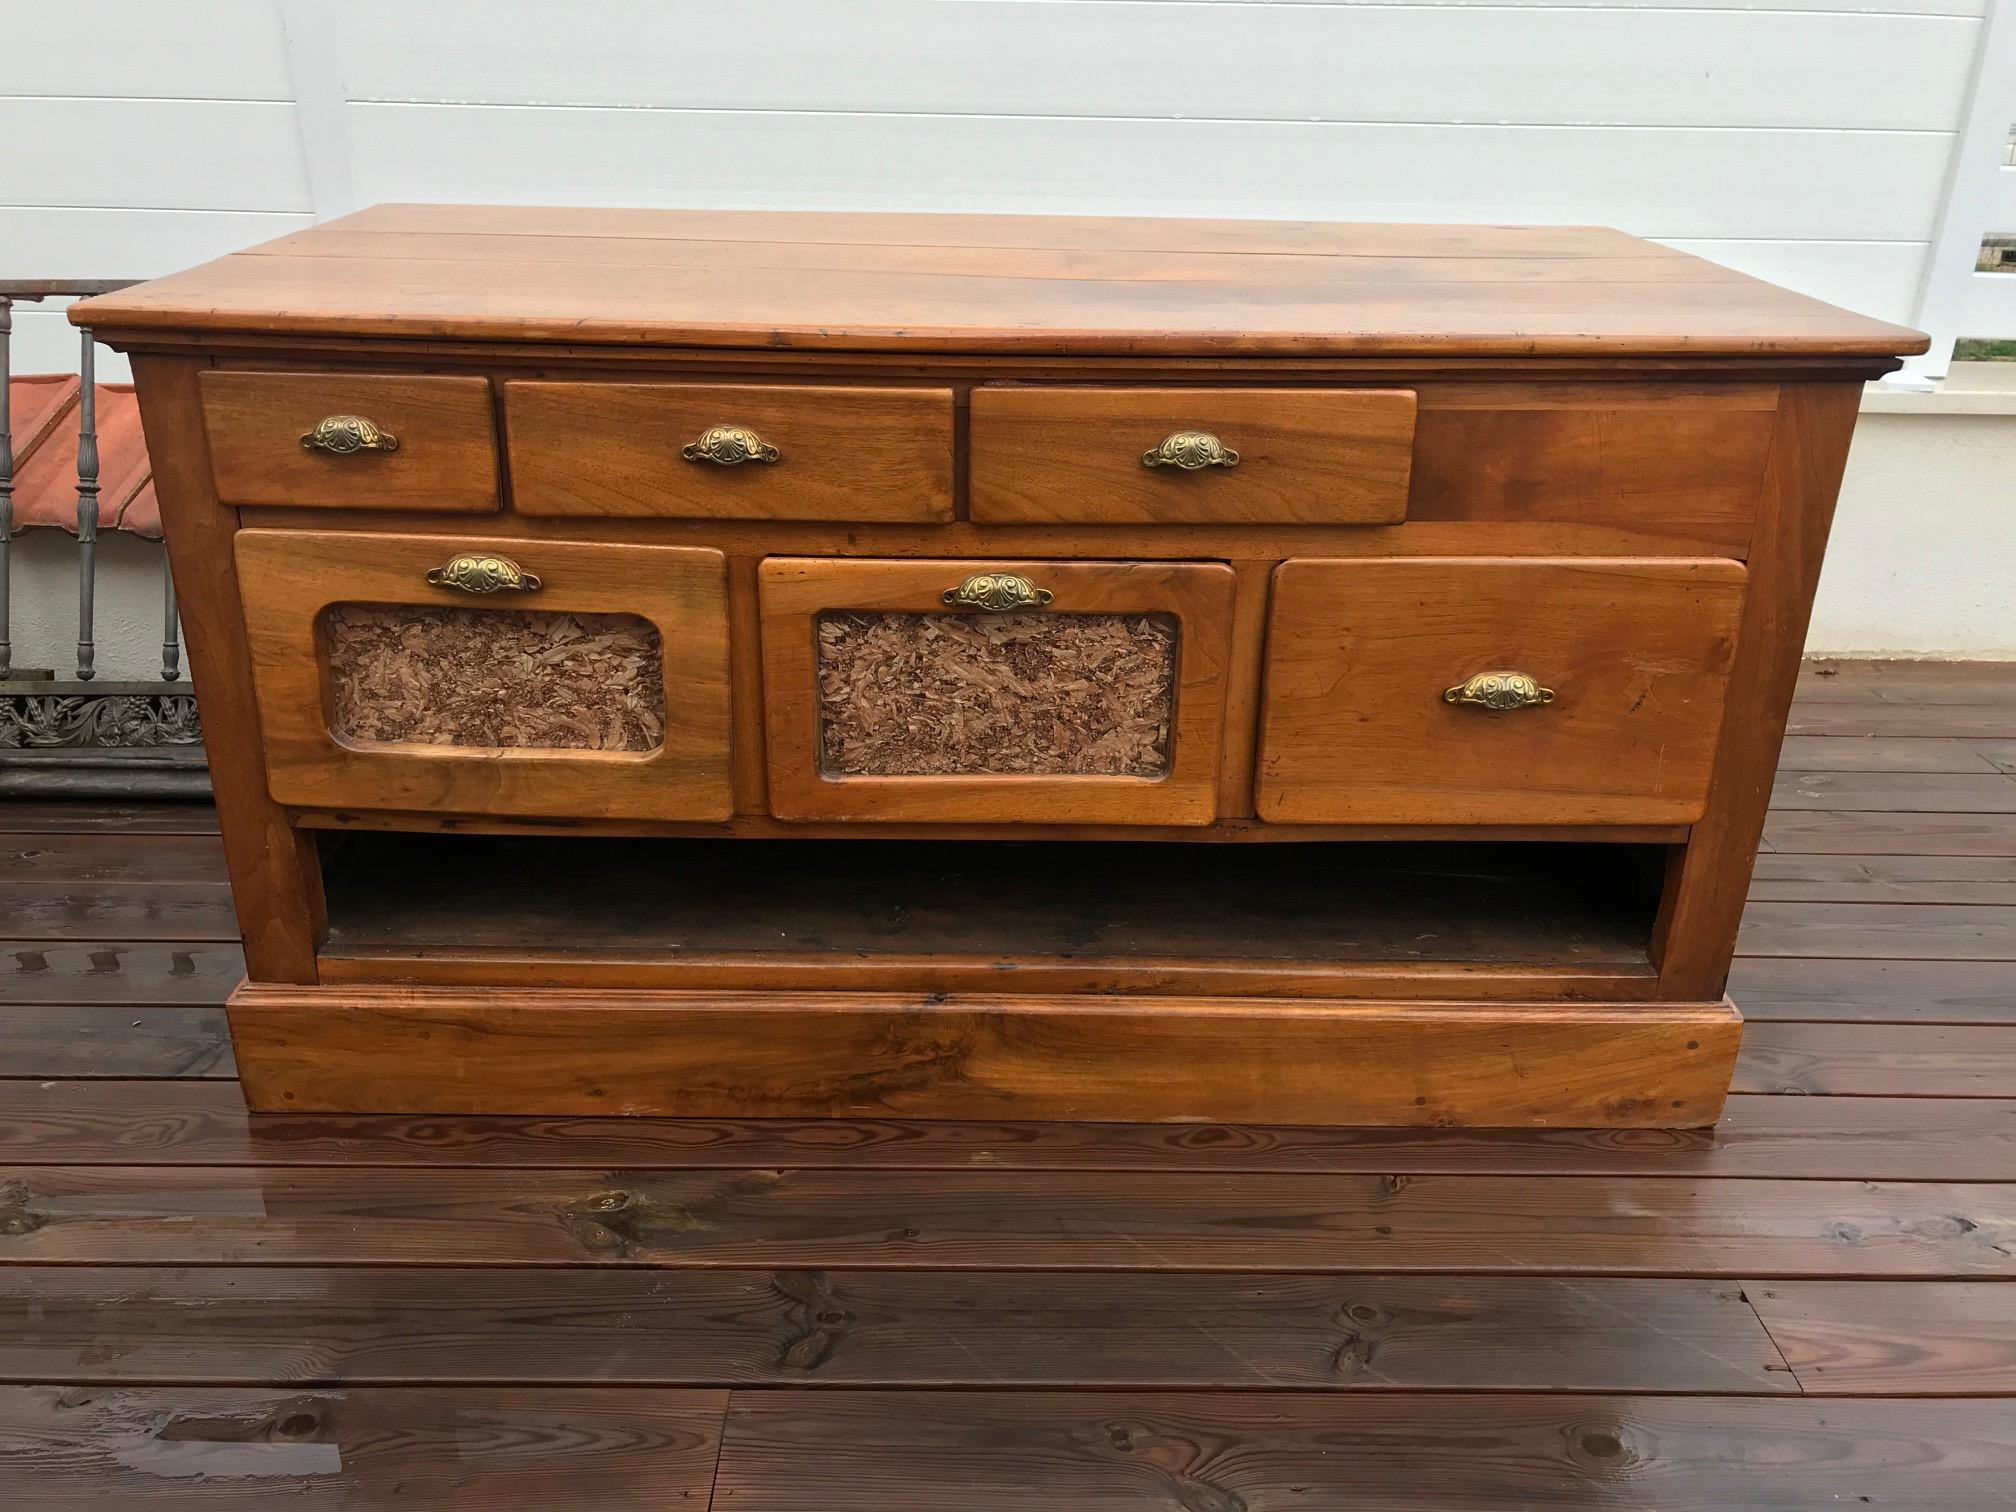 Exceptionnal 20th century French walnut apothecary cabinet or chest of drawer from the 1900s. 
One side has many drawers and the other side has also drawers and a large opening space on the bottom. Would be perfect in a kitchen or to separate a